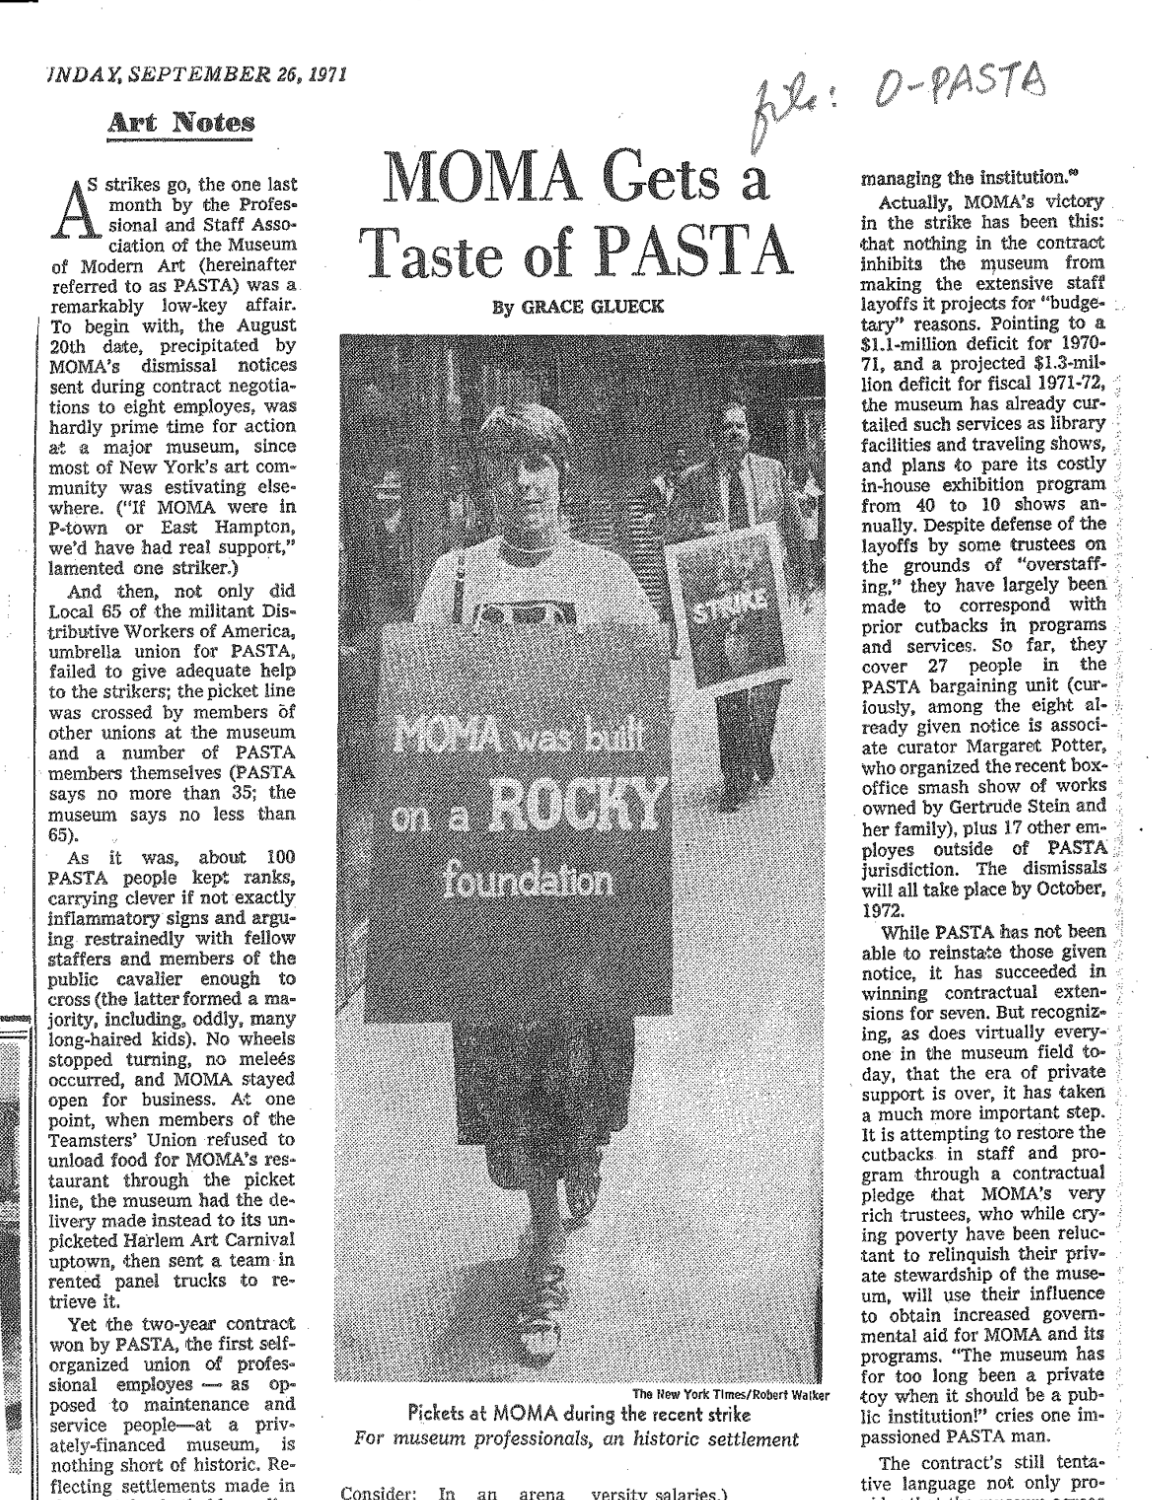 Newspaper clipping with headline “MOMA Gets a Taste of PASTA”